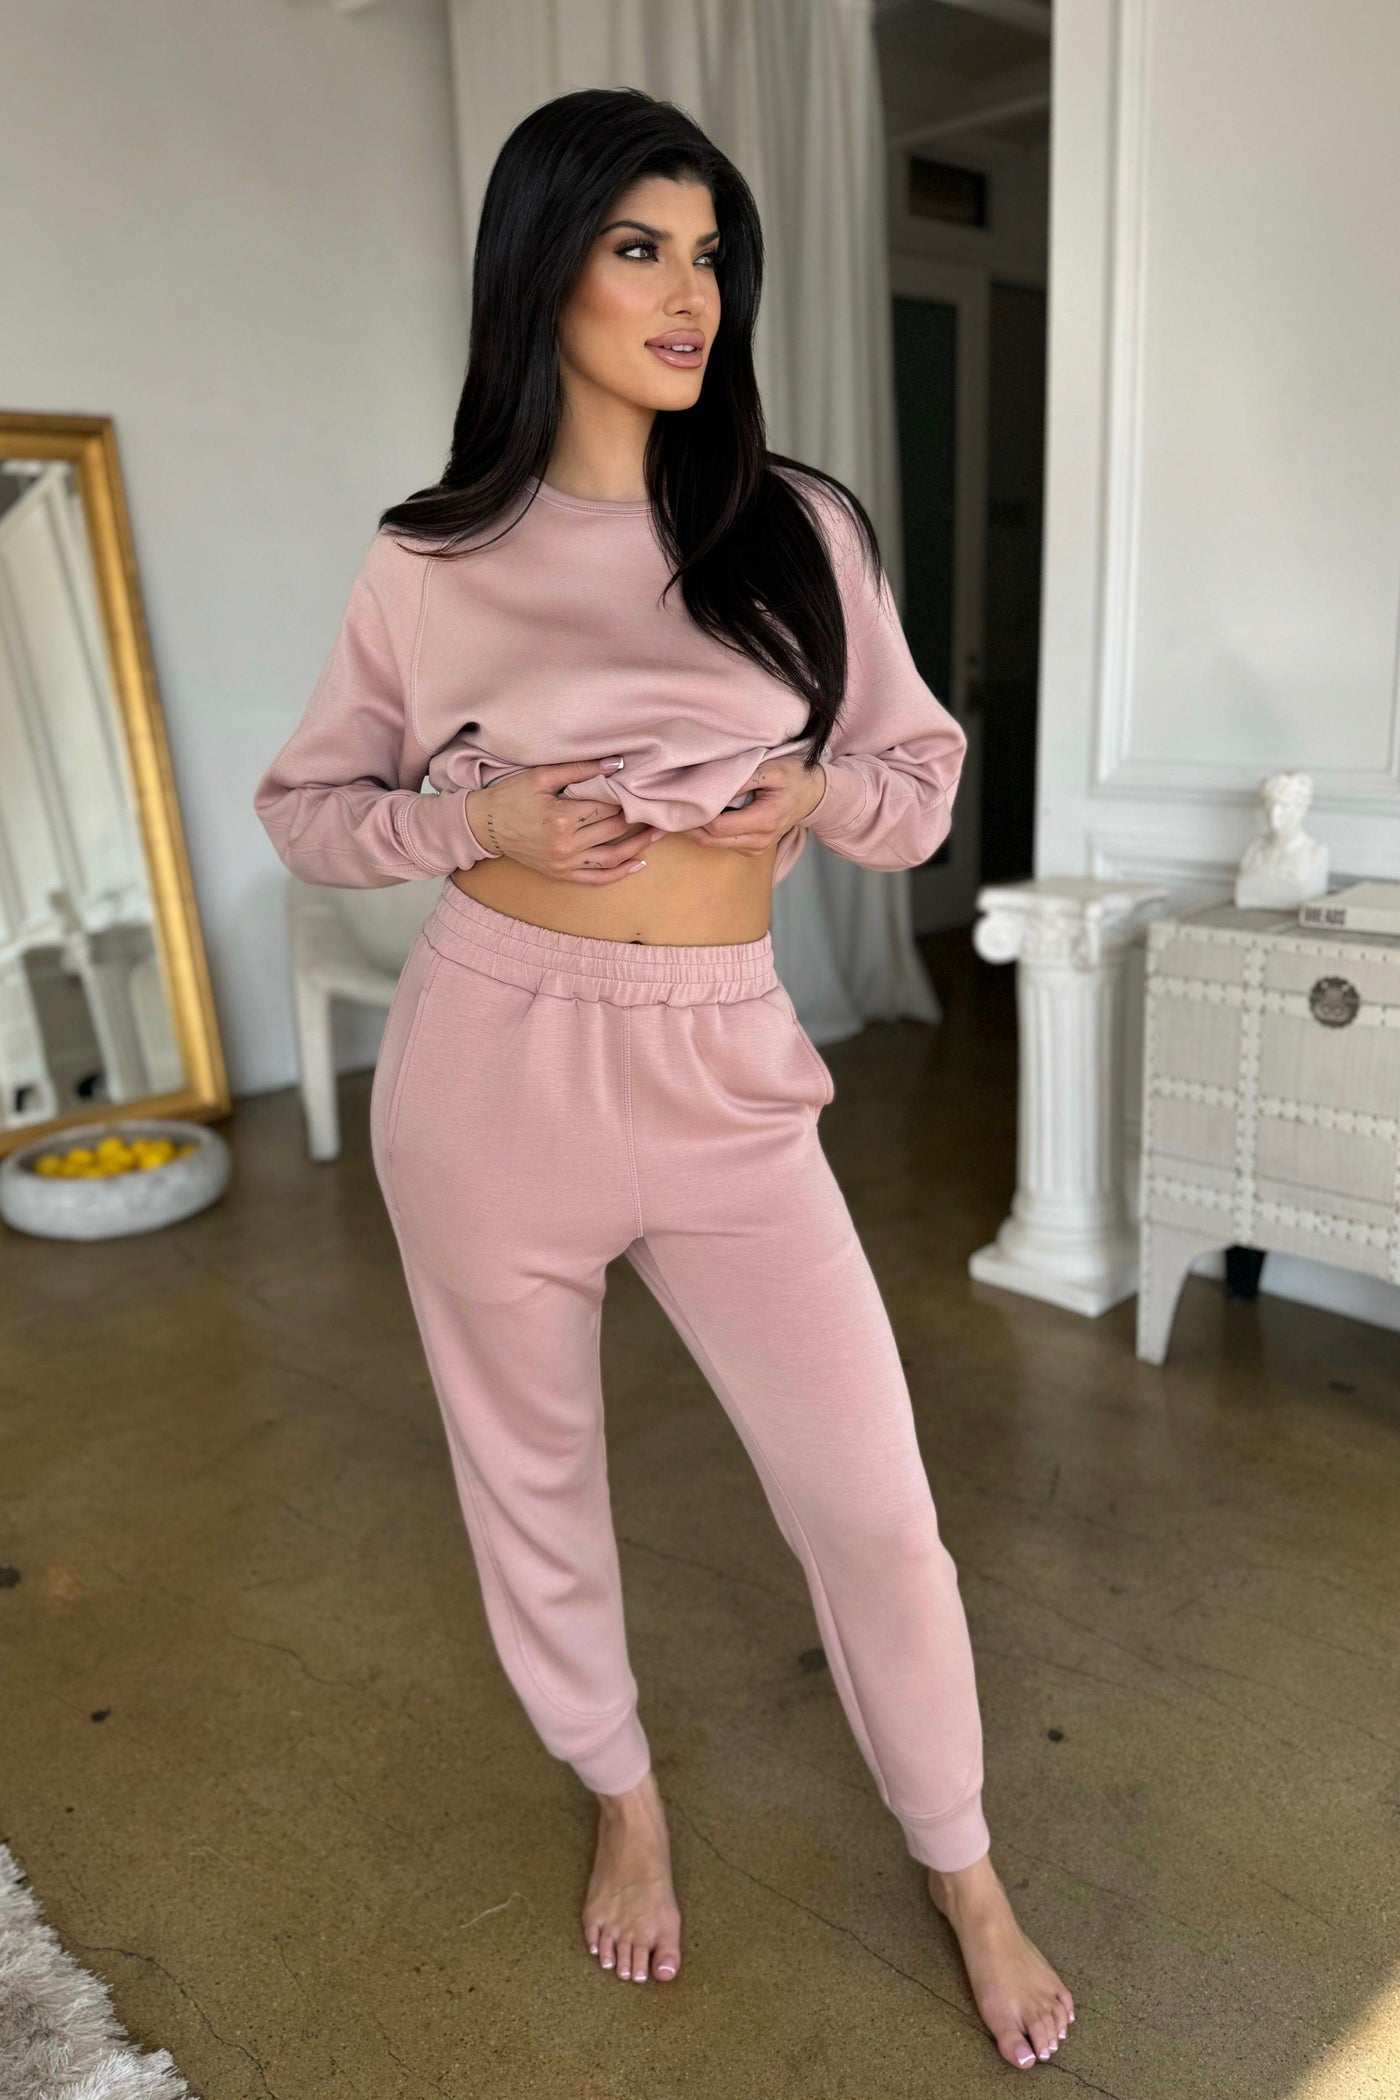 SOFIA JOGGERS , JOGGERS , it’sNOMB. The Label , ATHLEISURE, HIGH WAISTED, JOGGER, joggers, LOUNGE WEAR, LOUNGEWEAR, plus size, SOFIA JOGGERS, sweater, sweatpants , It's NOMB , itsnomb.com